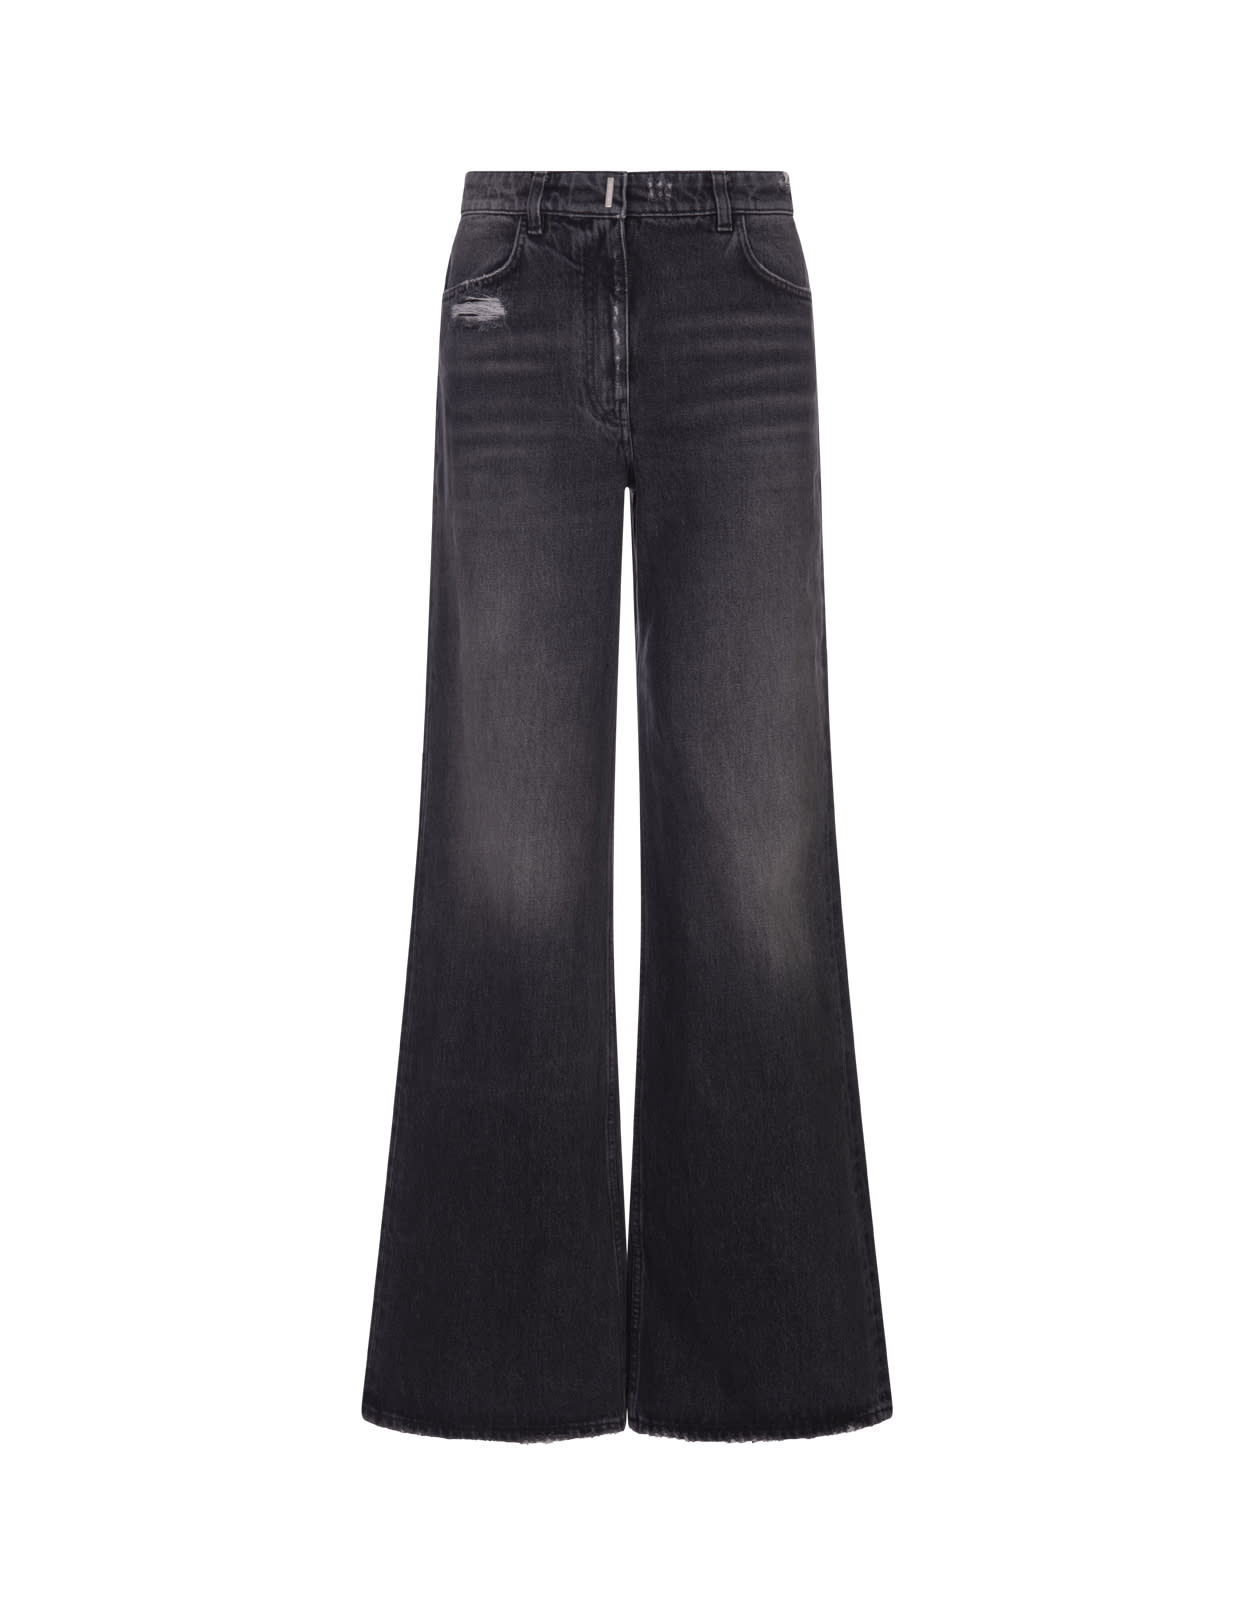 GIVENCHY OVERSIZED JEANS IN BLACK WASHED DENIM